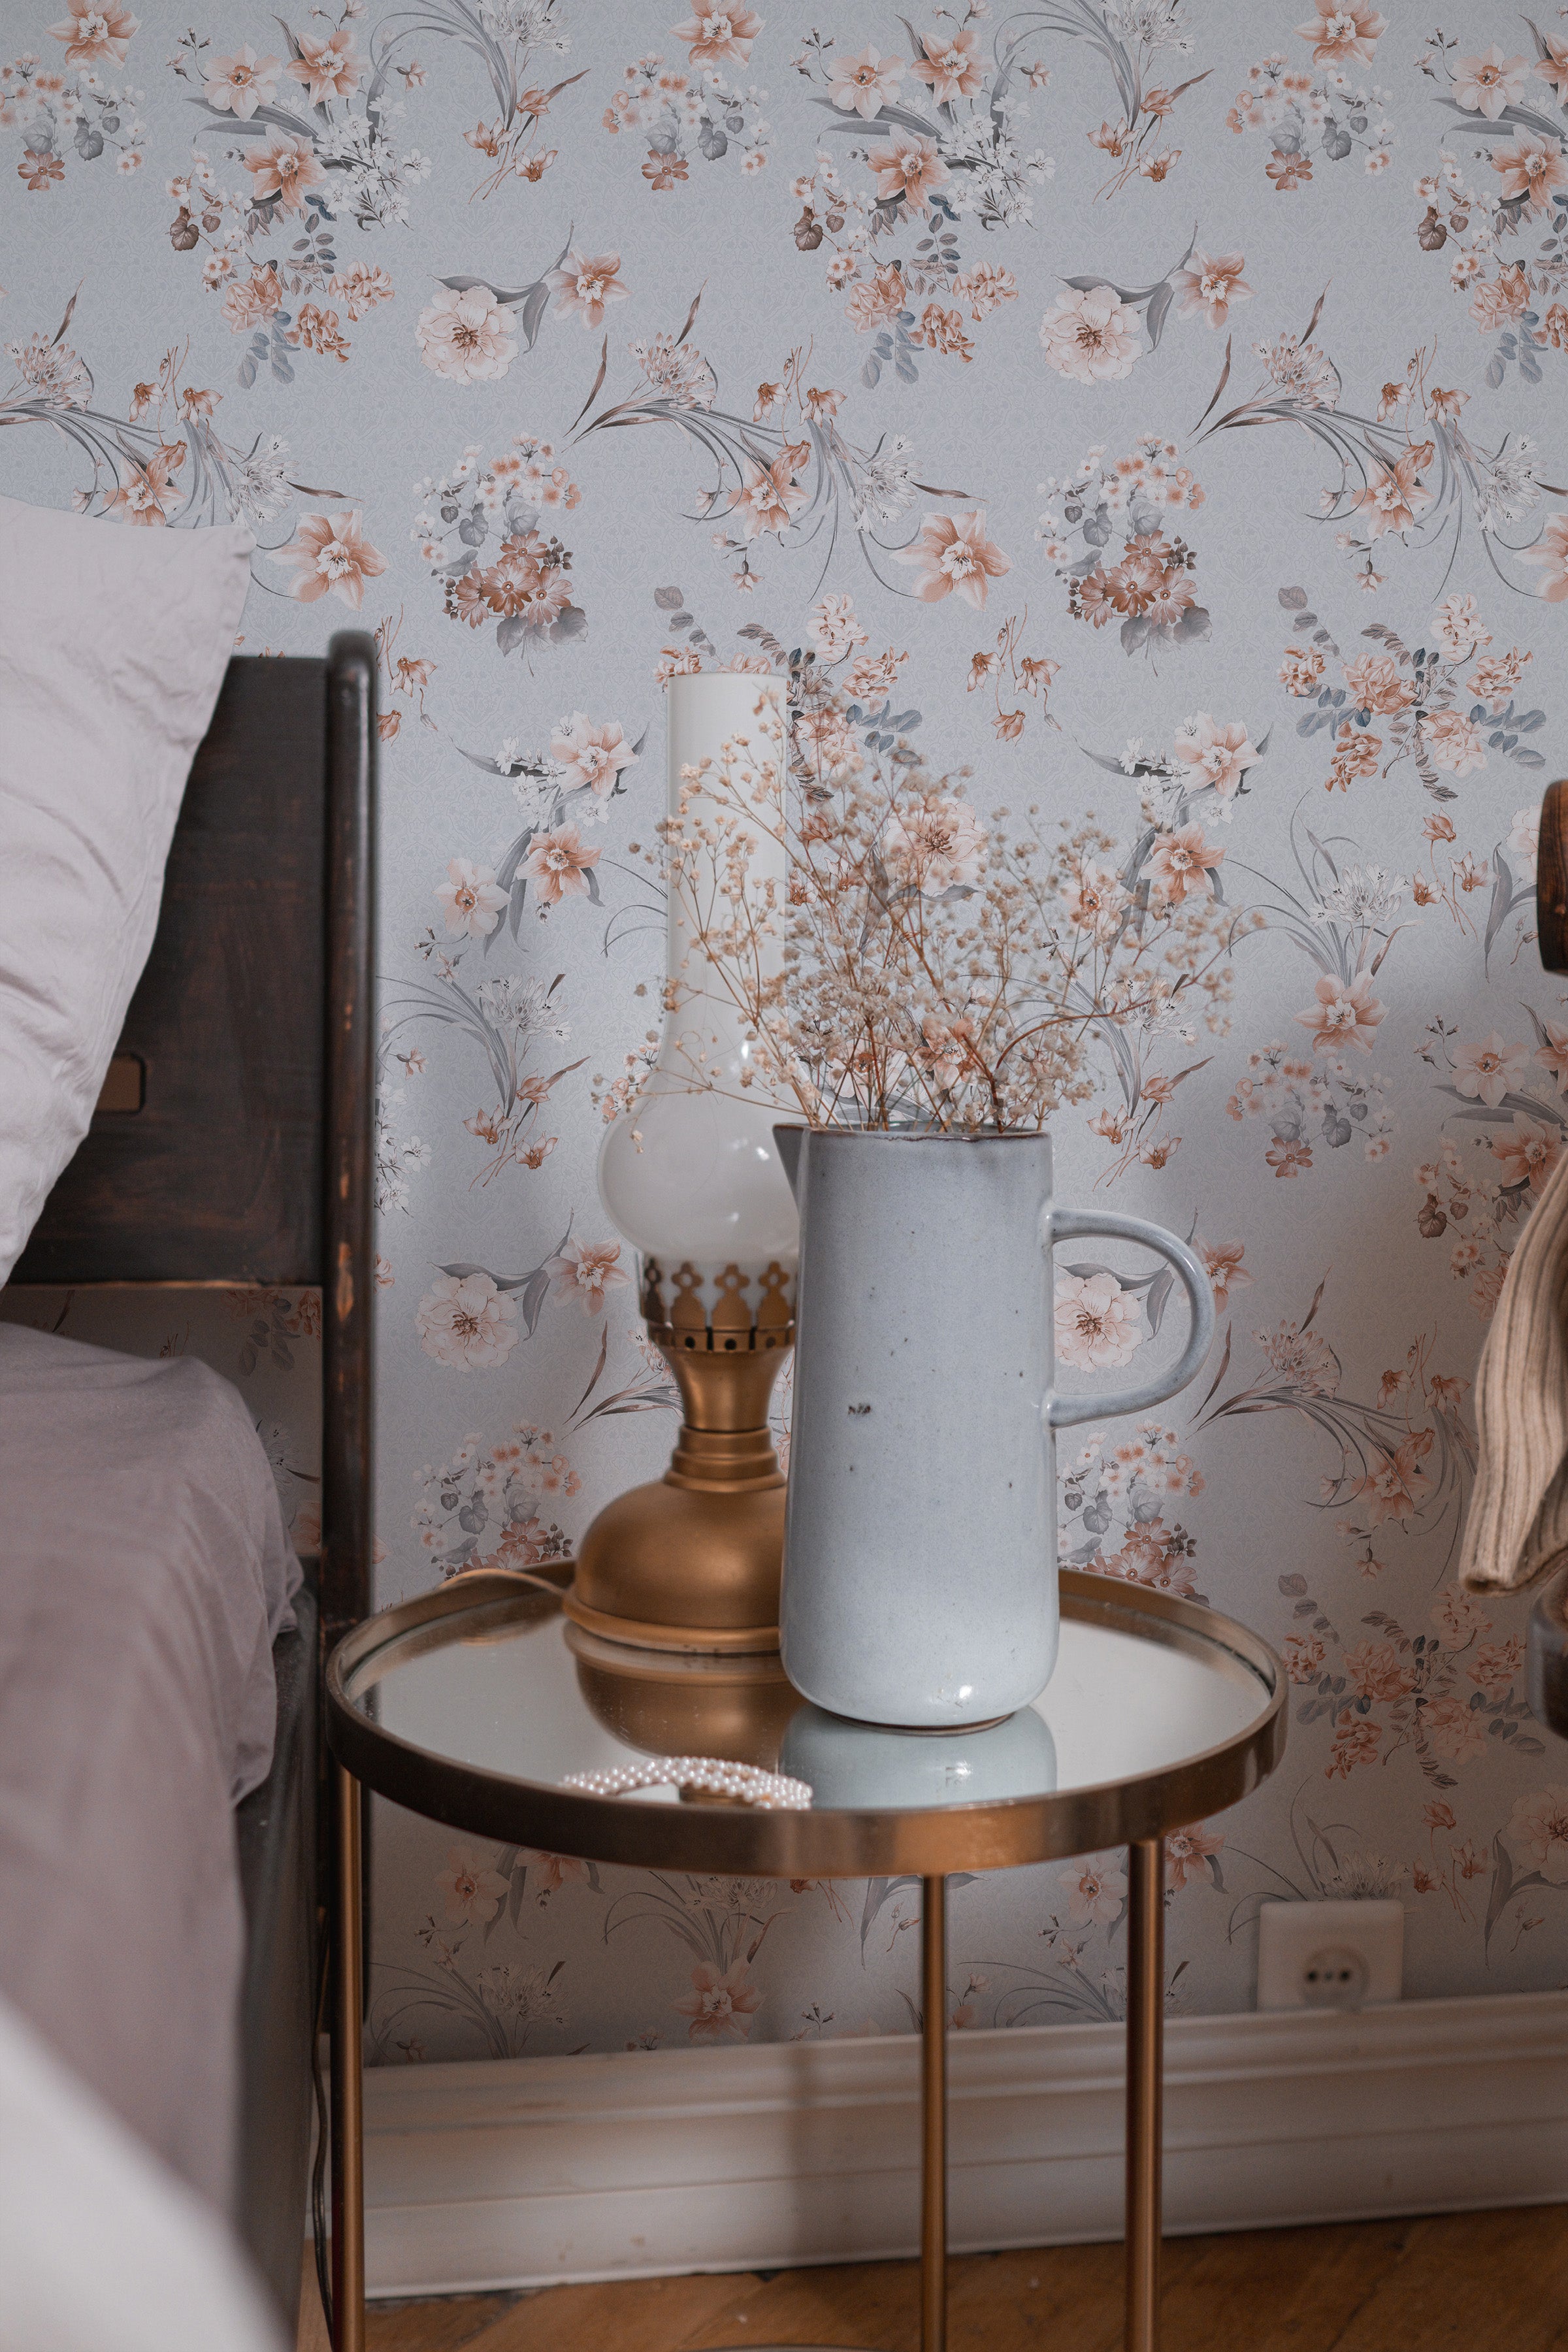 A charming bedroom setup highlighting the Boudoir Blooms Wallpaper which serves as a backdrop for a nightstand scene. The wallpaper's floral pattern in peach and gray complements the vintage brass lamp and ceramic vase, adding a touch of elegance to the intimate space